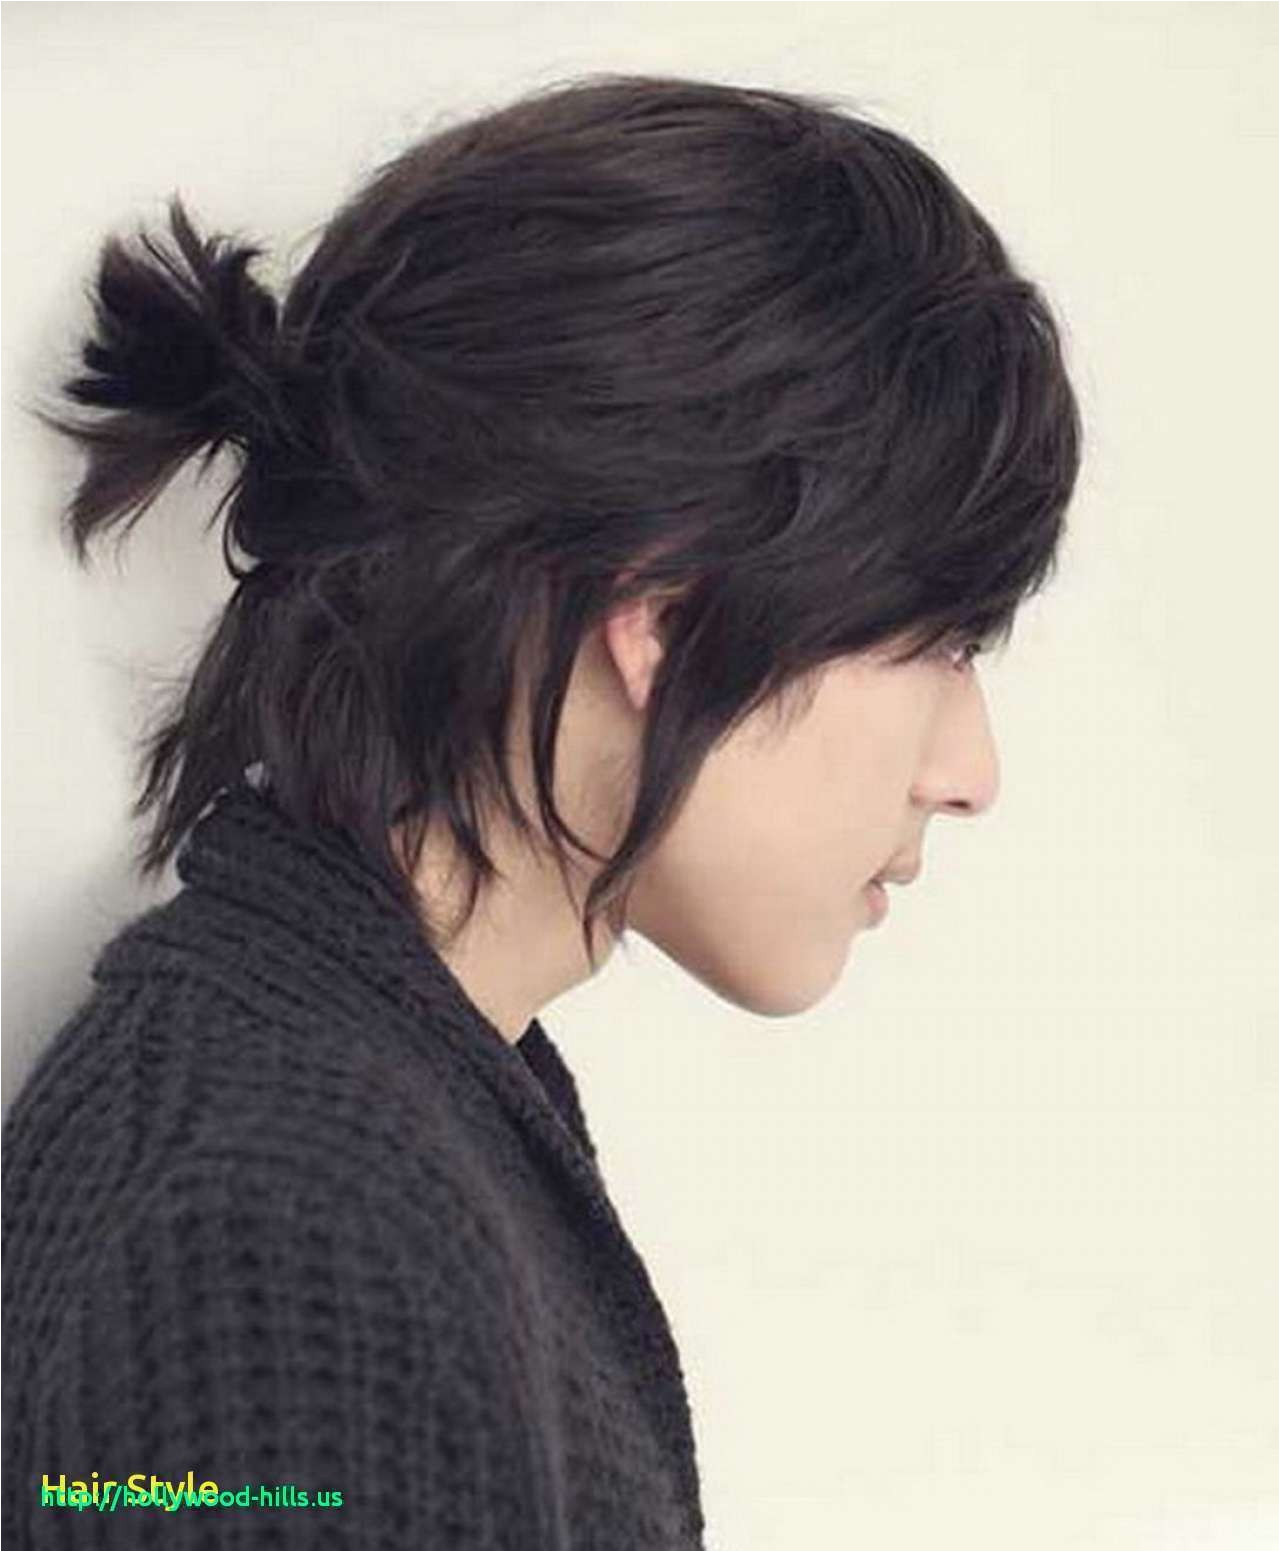 Thick asian Hair Men asian Hair Styles Men Elegant Long Short Hairstyles Awesome Thick